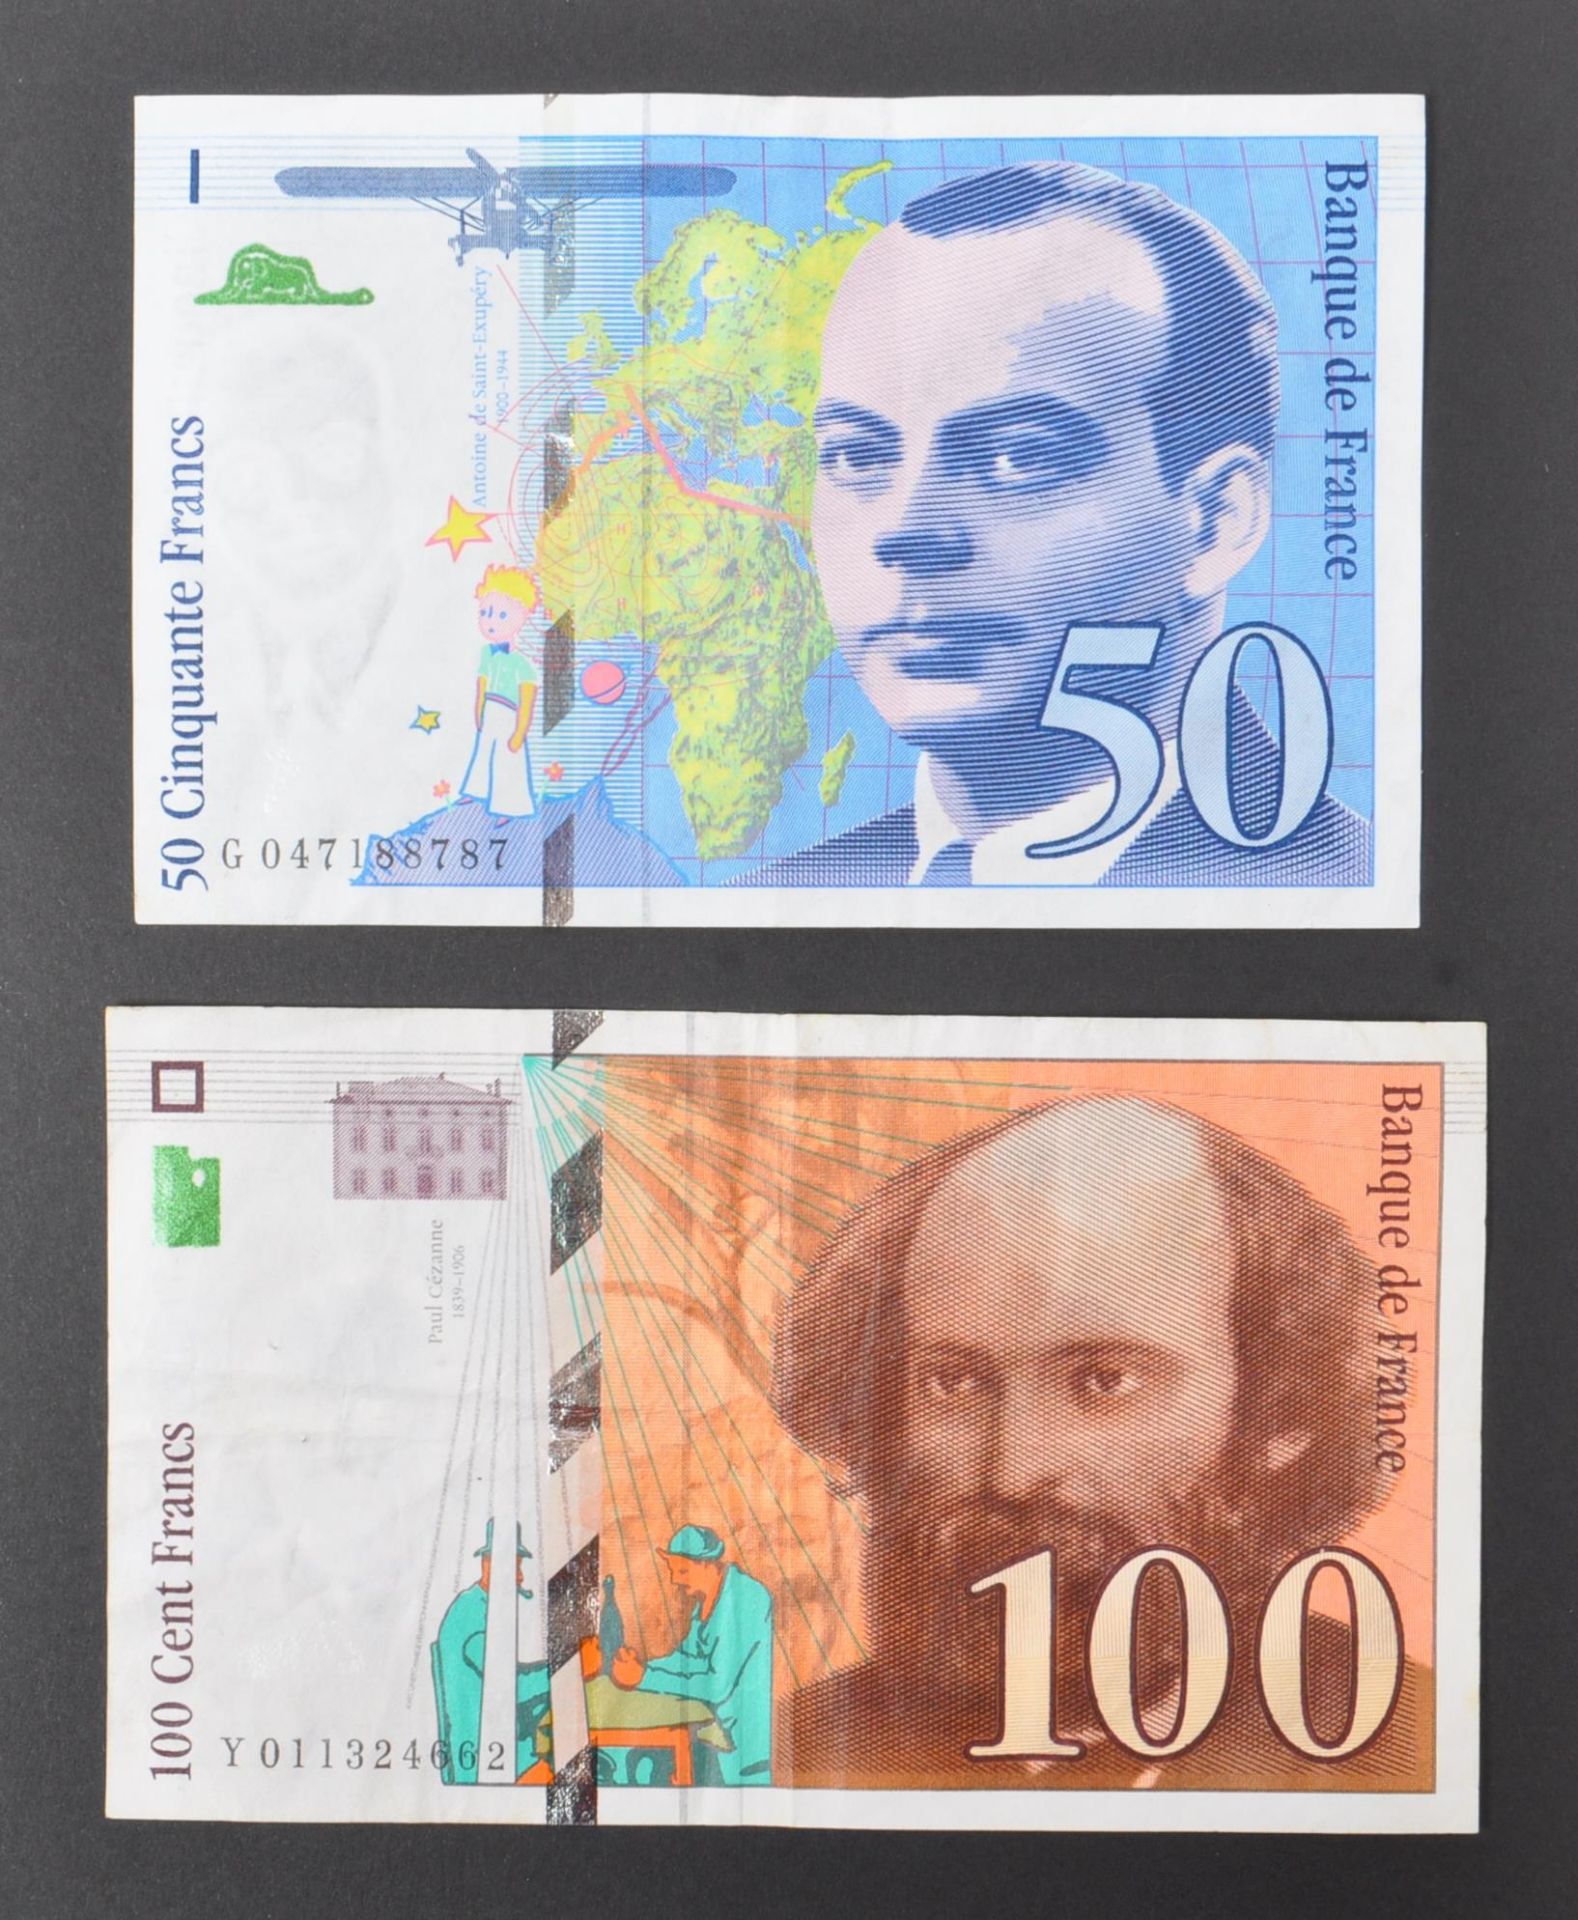 INTERNATIONAL MOSTLY UNCIRCULATED BANK NOTES - EUROPE - Image 9 of 30